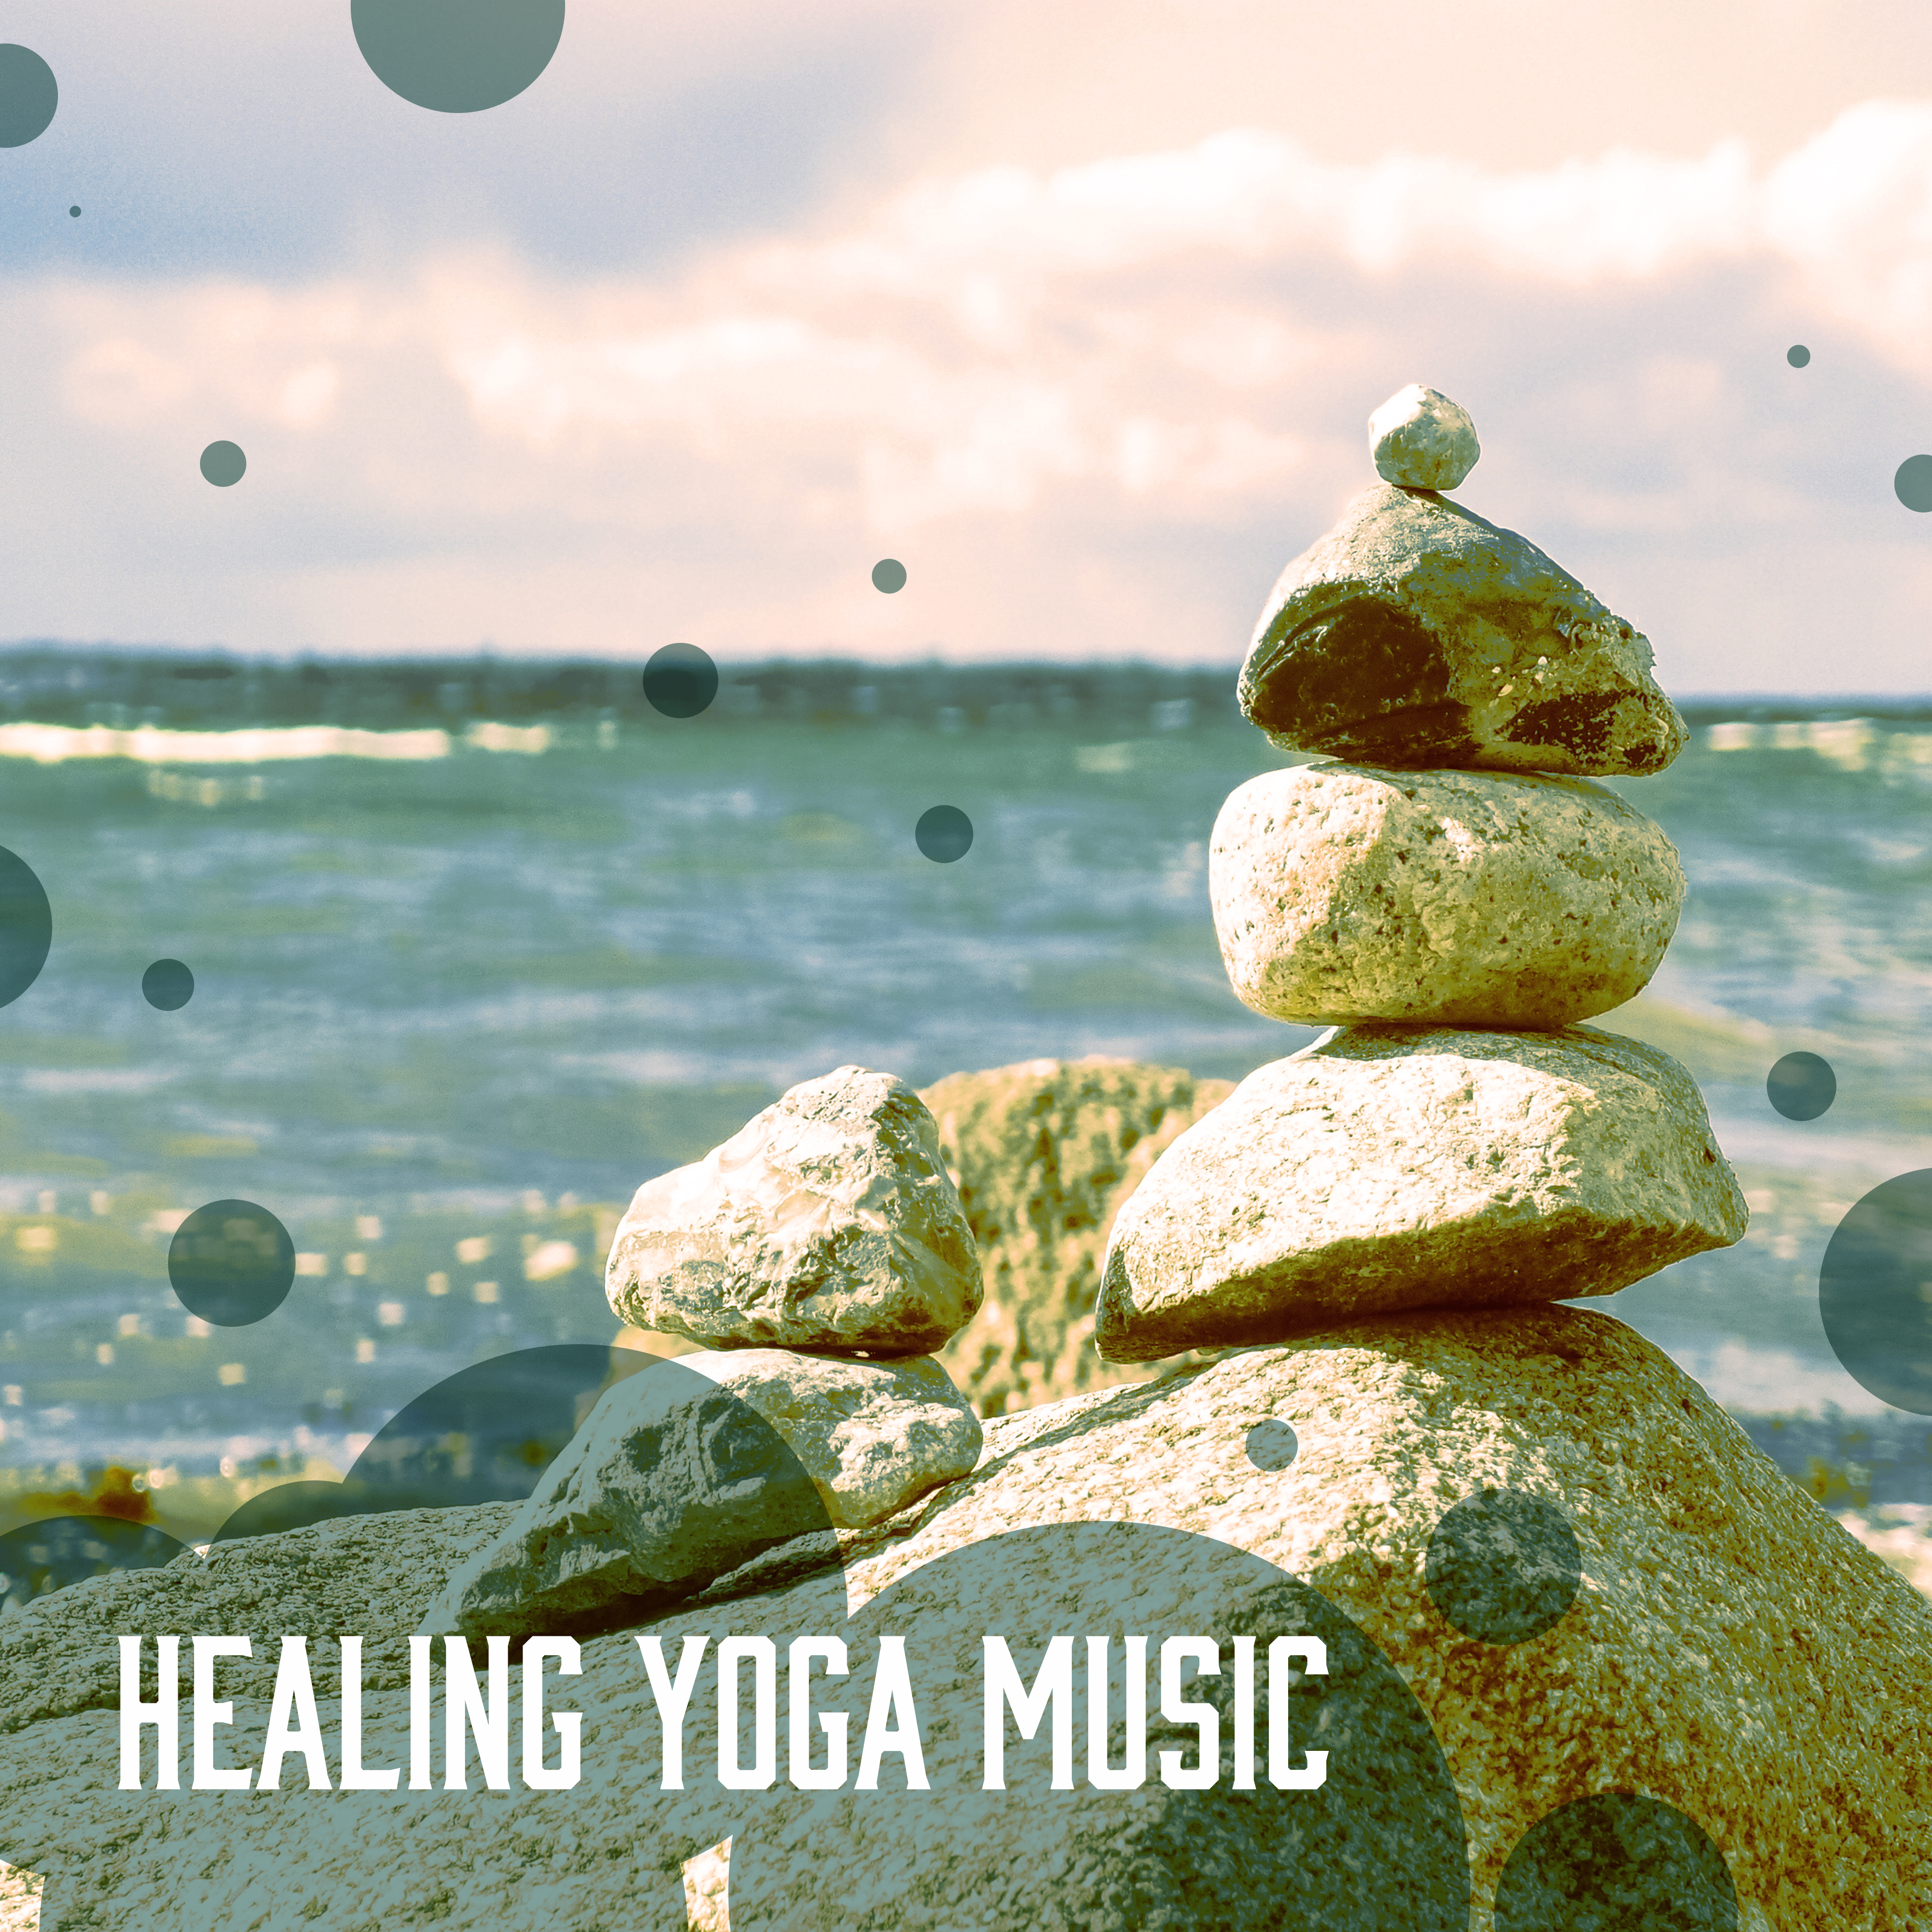 Healing Yoga Music – Deep Relaxing sounds of New Age Music for Yoga Practice, Healing Nature Sounds, New Age Music, Bird Sounds